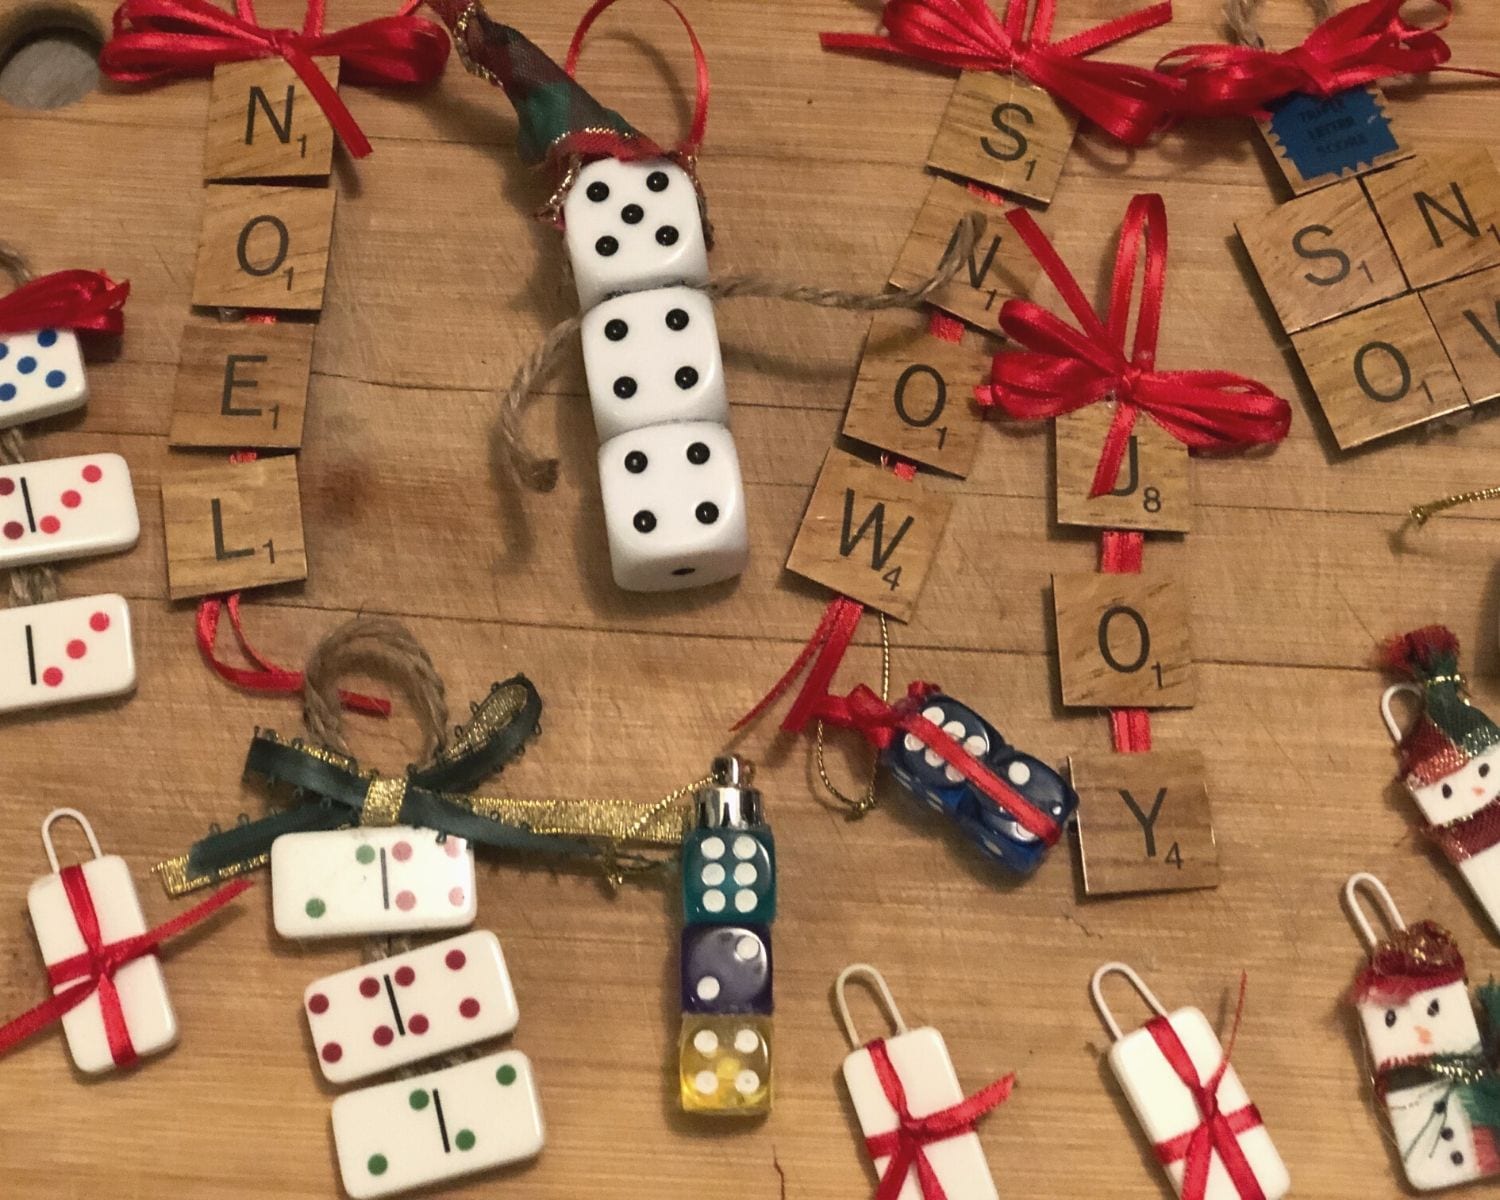 Love to play games?  With a few simple craft supplies and a little imagination, you can create Christmas ornaments using game pieces.